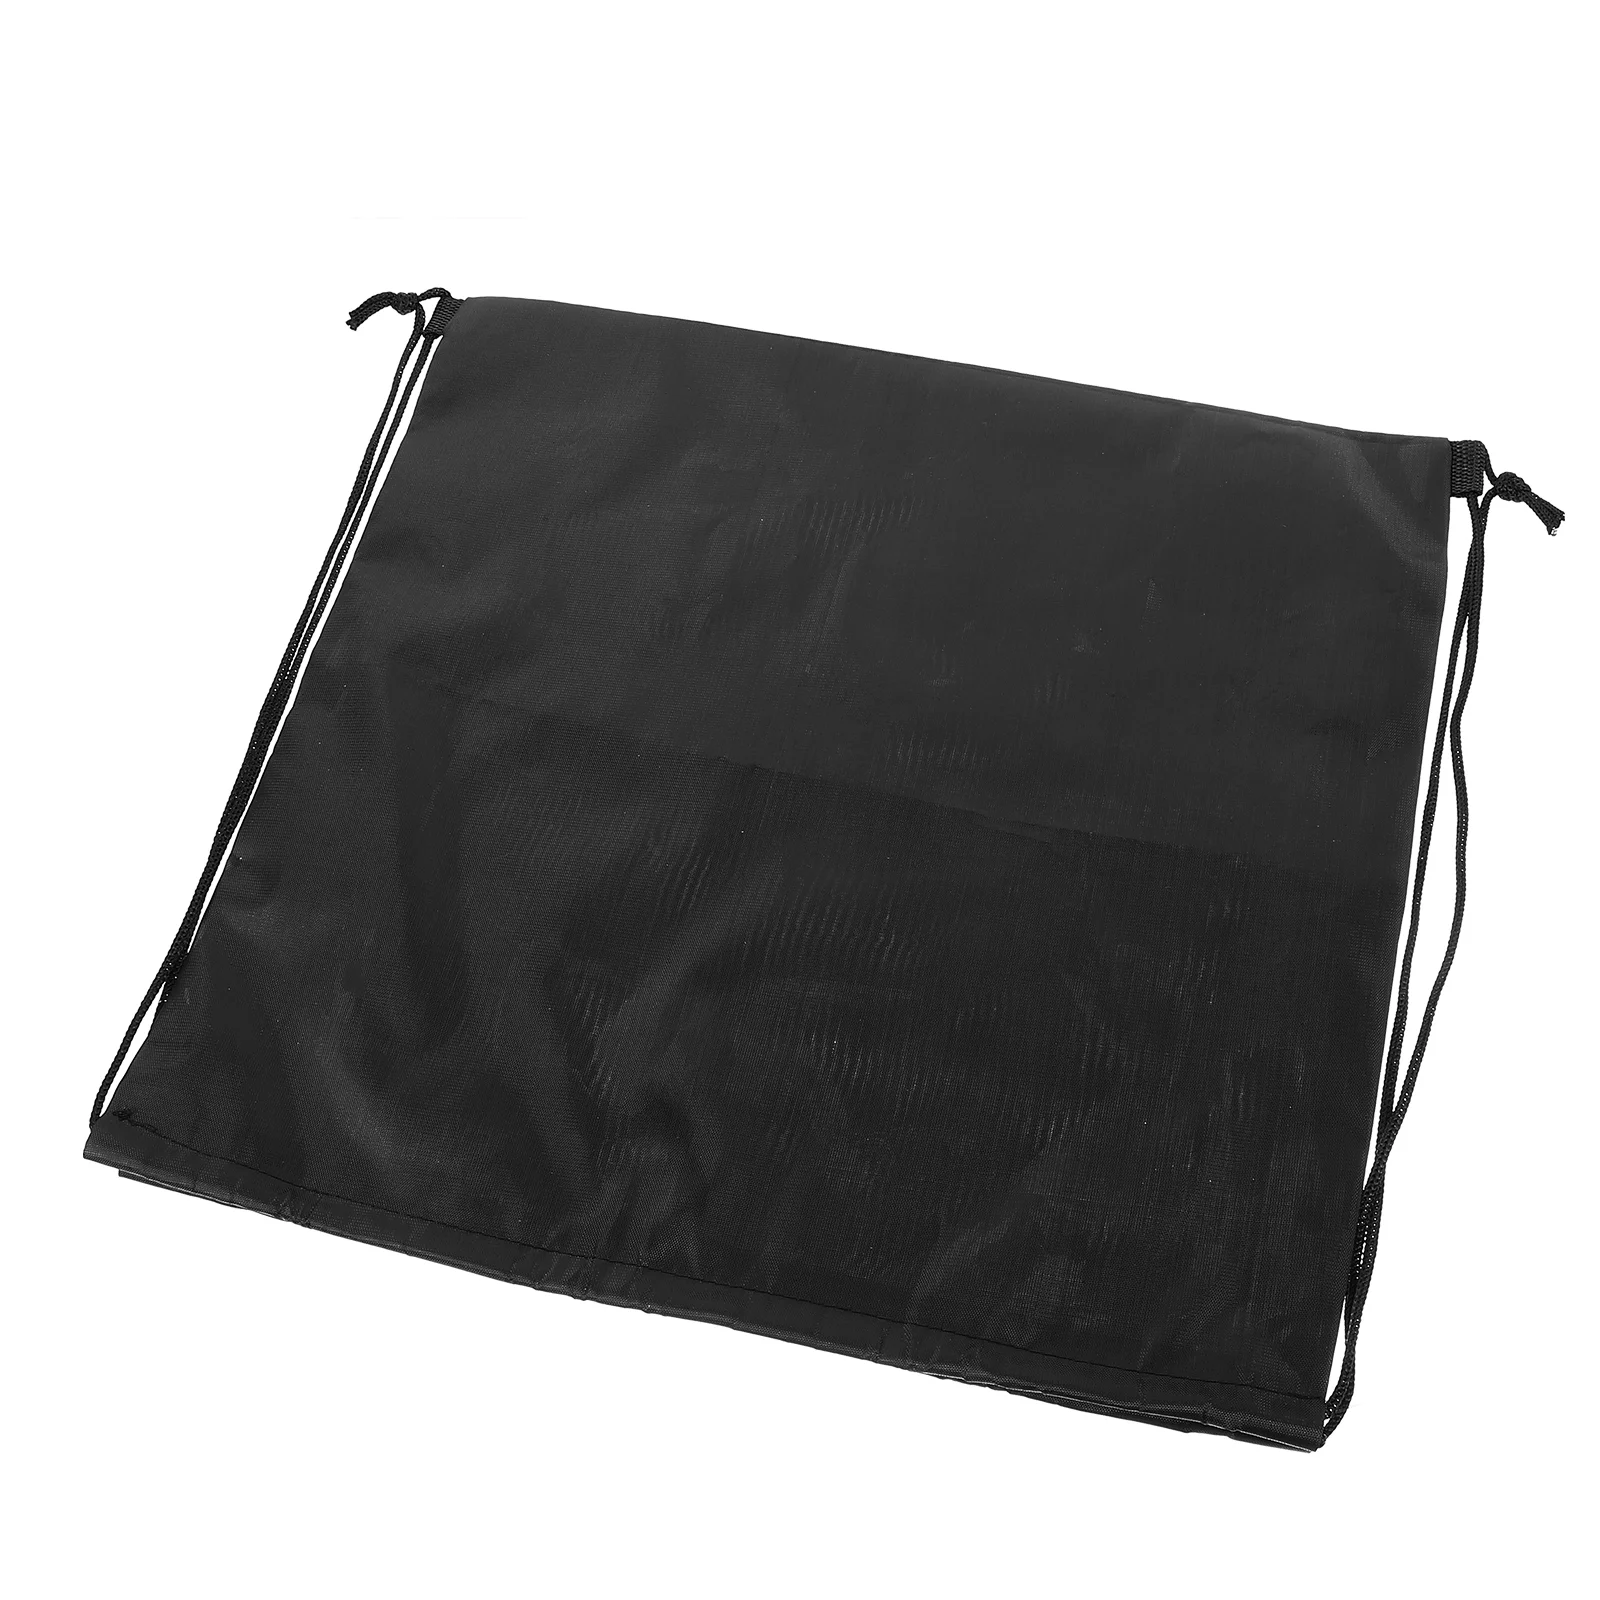 Portable Bag Drawstring Pouch Outdoor Motorcycle Storage Bag 2022 new outdoor portable travel storage bag tactical edc tool storage bag wash bag medical kit first aid kit 1